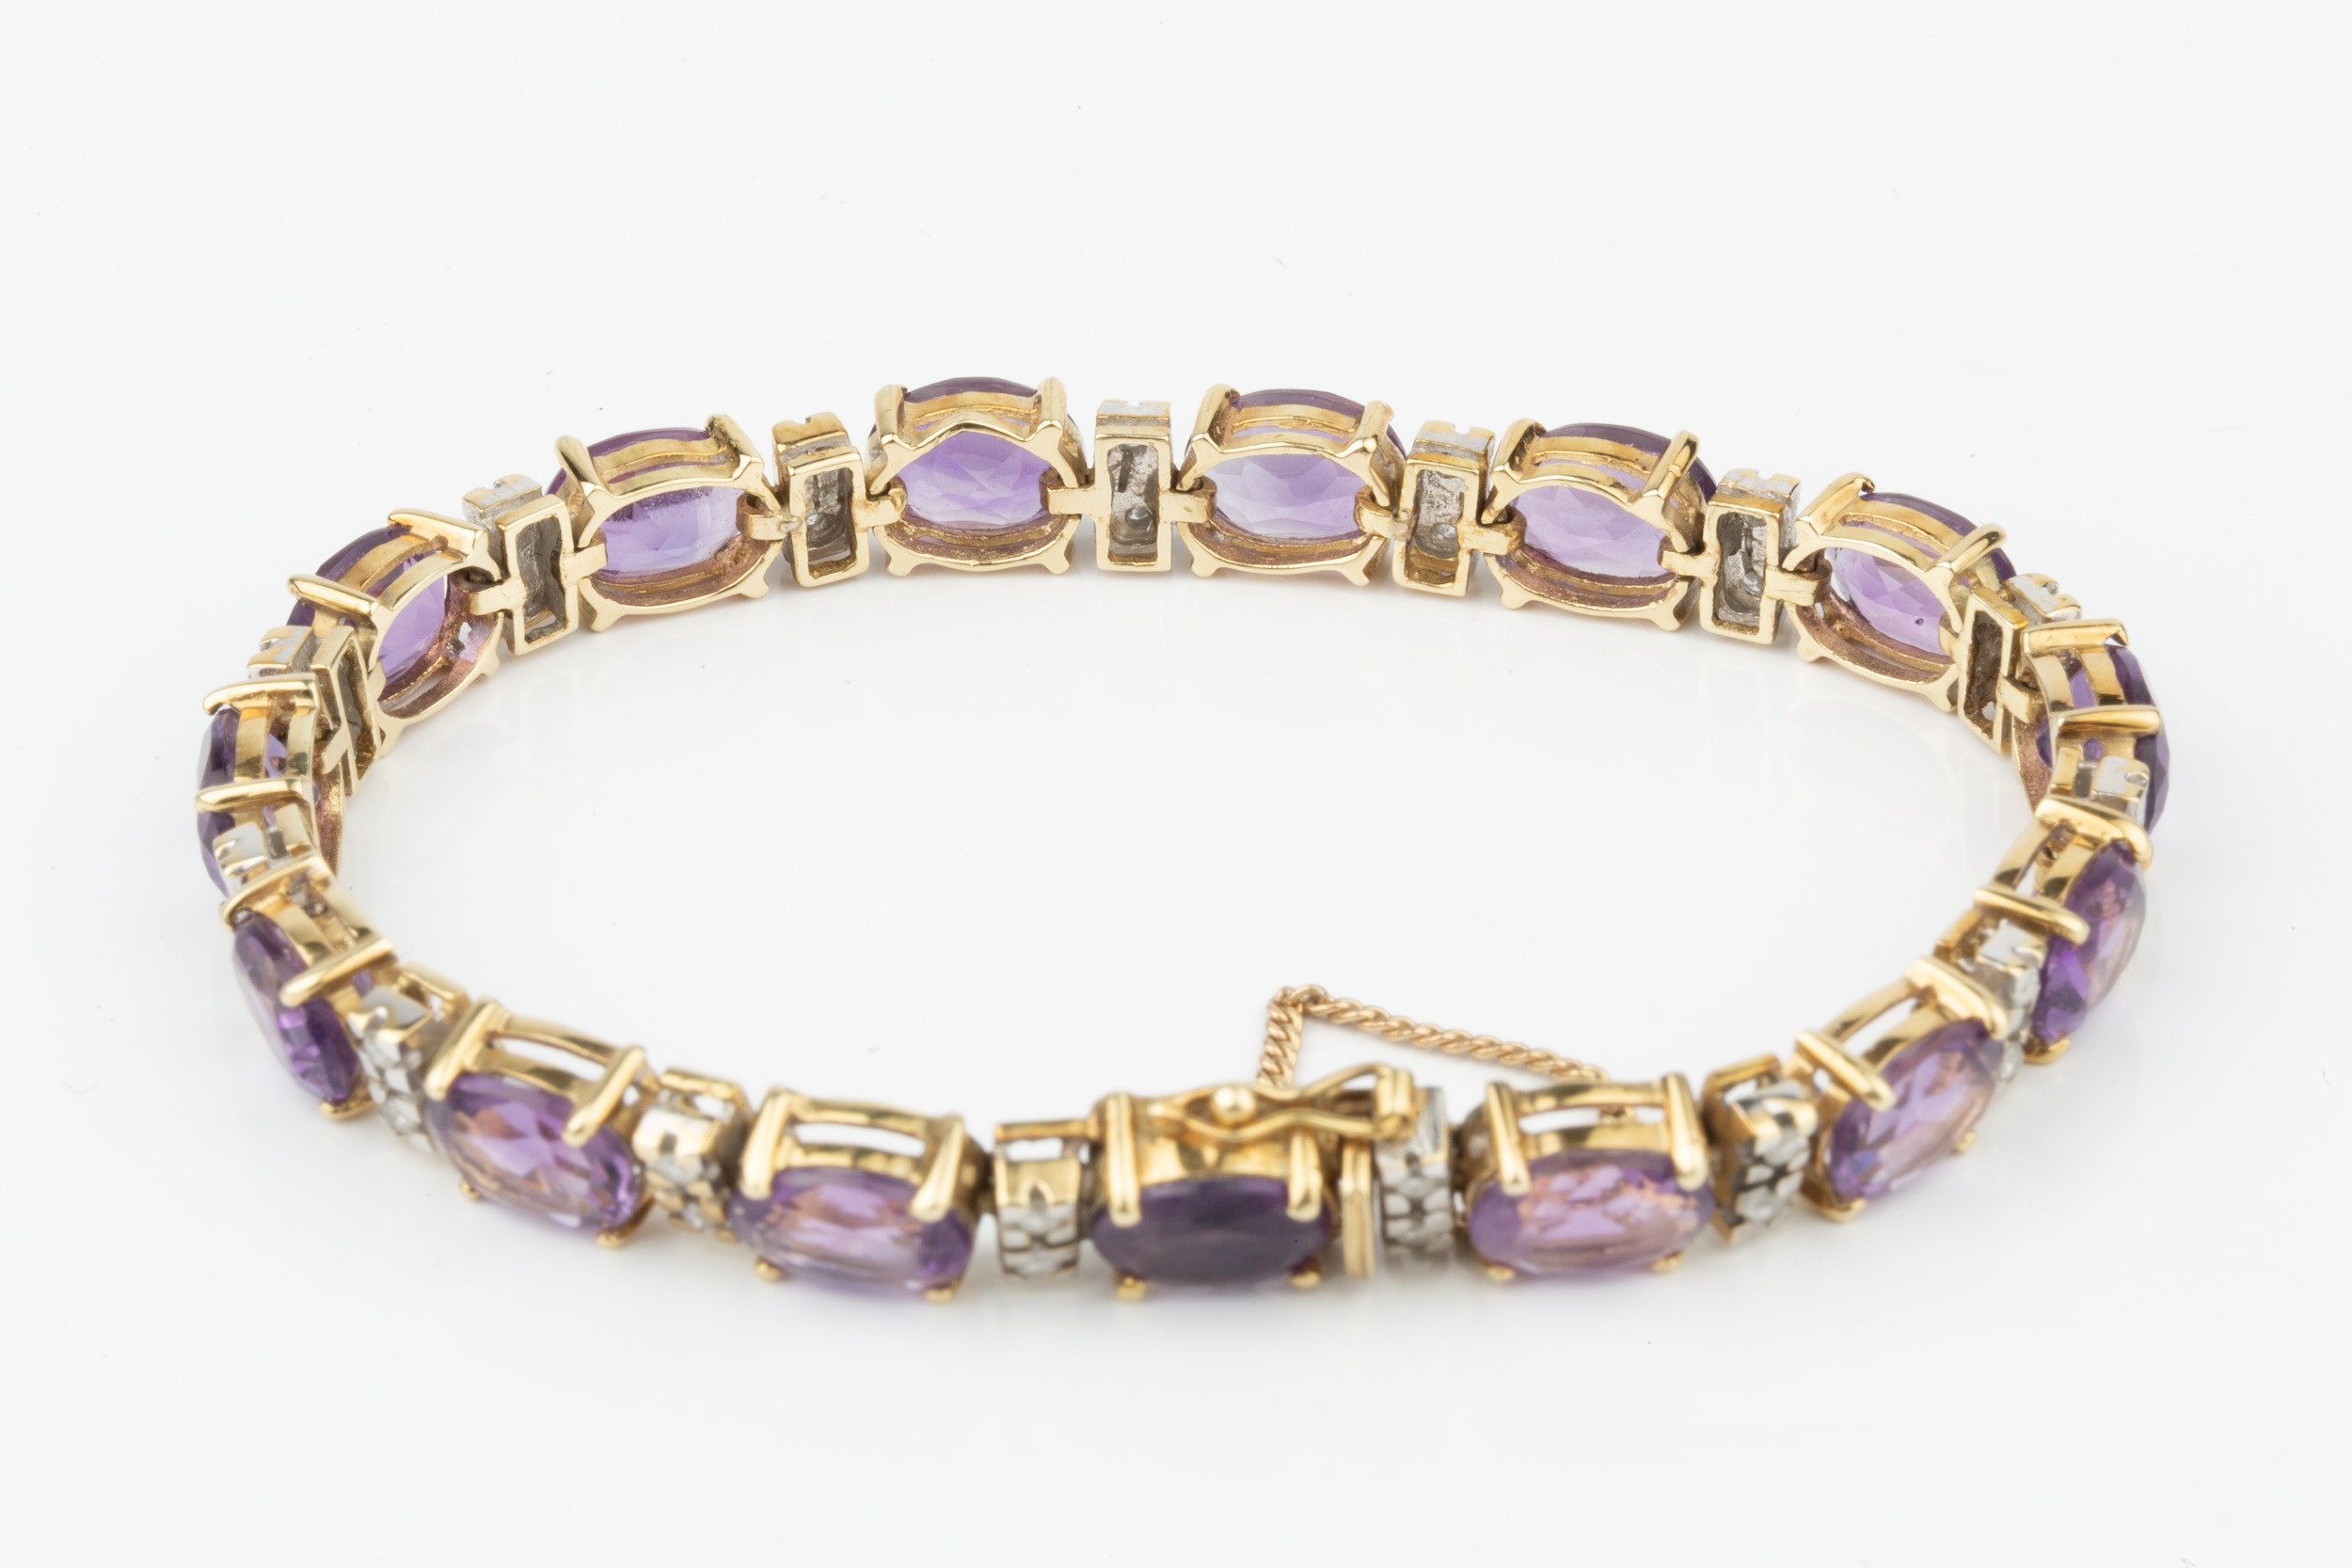 An amethyst and diamond bracelet, set with oval cut amethysts and having spacer bars between set - Image 2 of 2